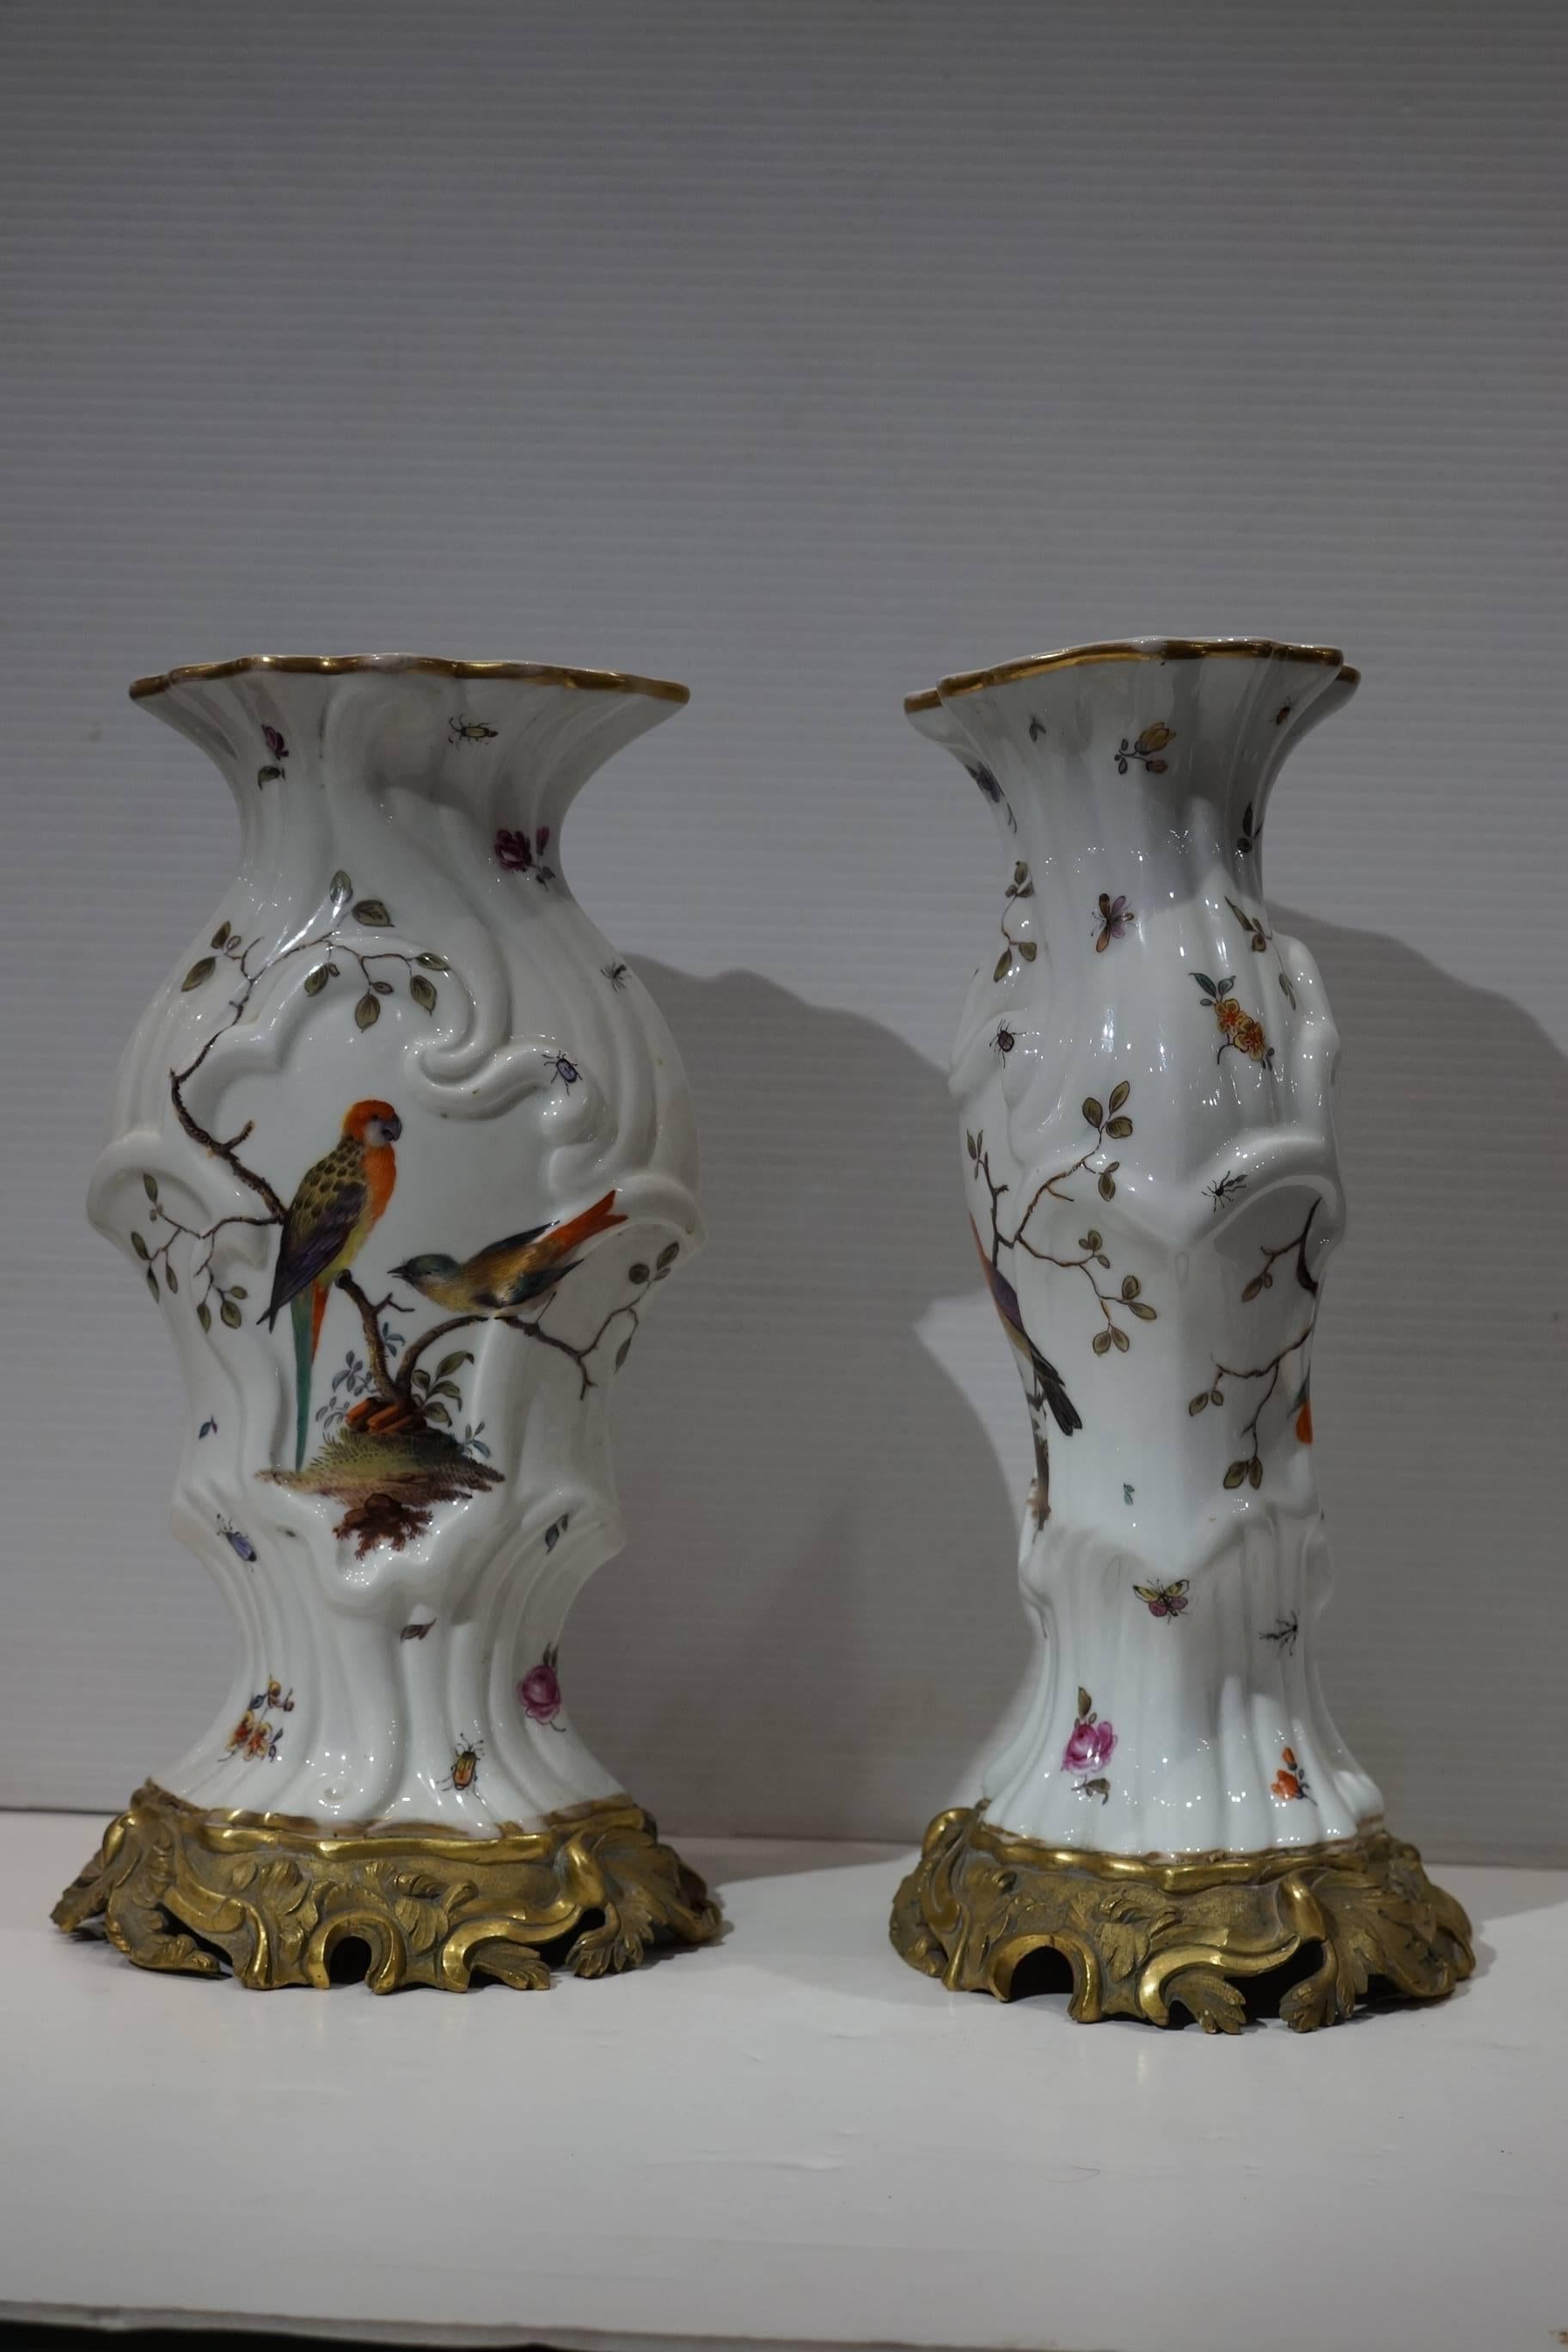 Pair of aesthetic painted porcelain and bronze covered urns with bird and flower decorations.